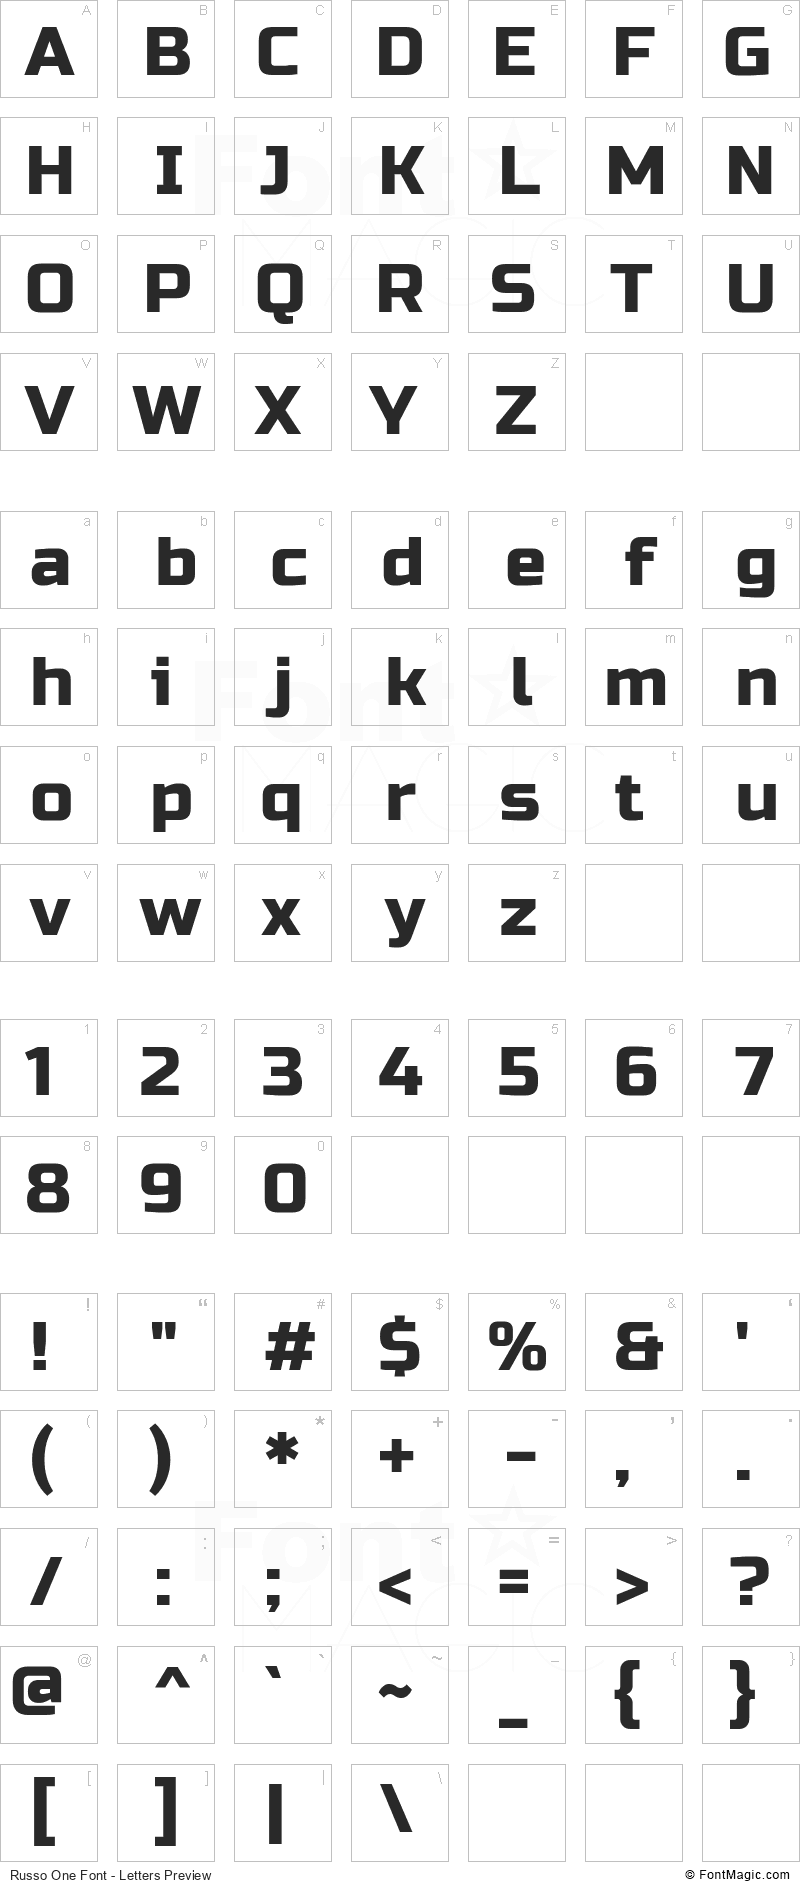 Russo One Font - All Latters Preview Chart